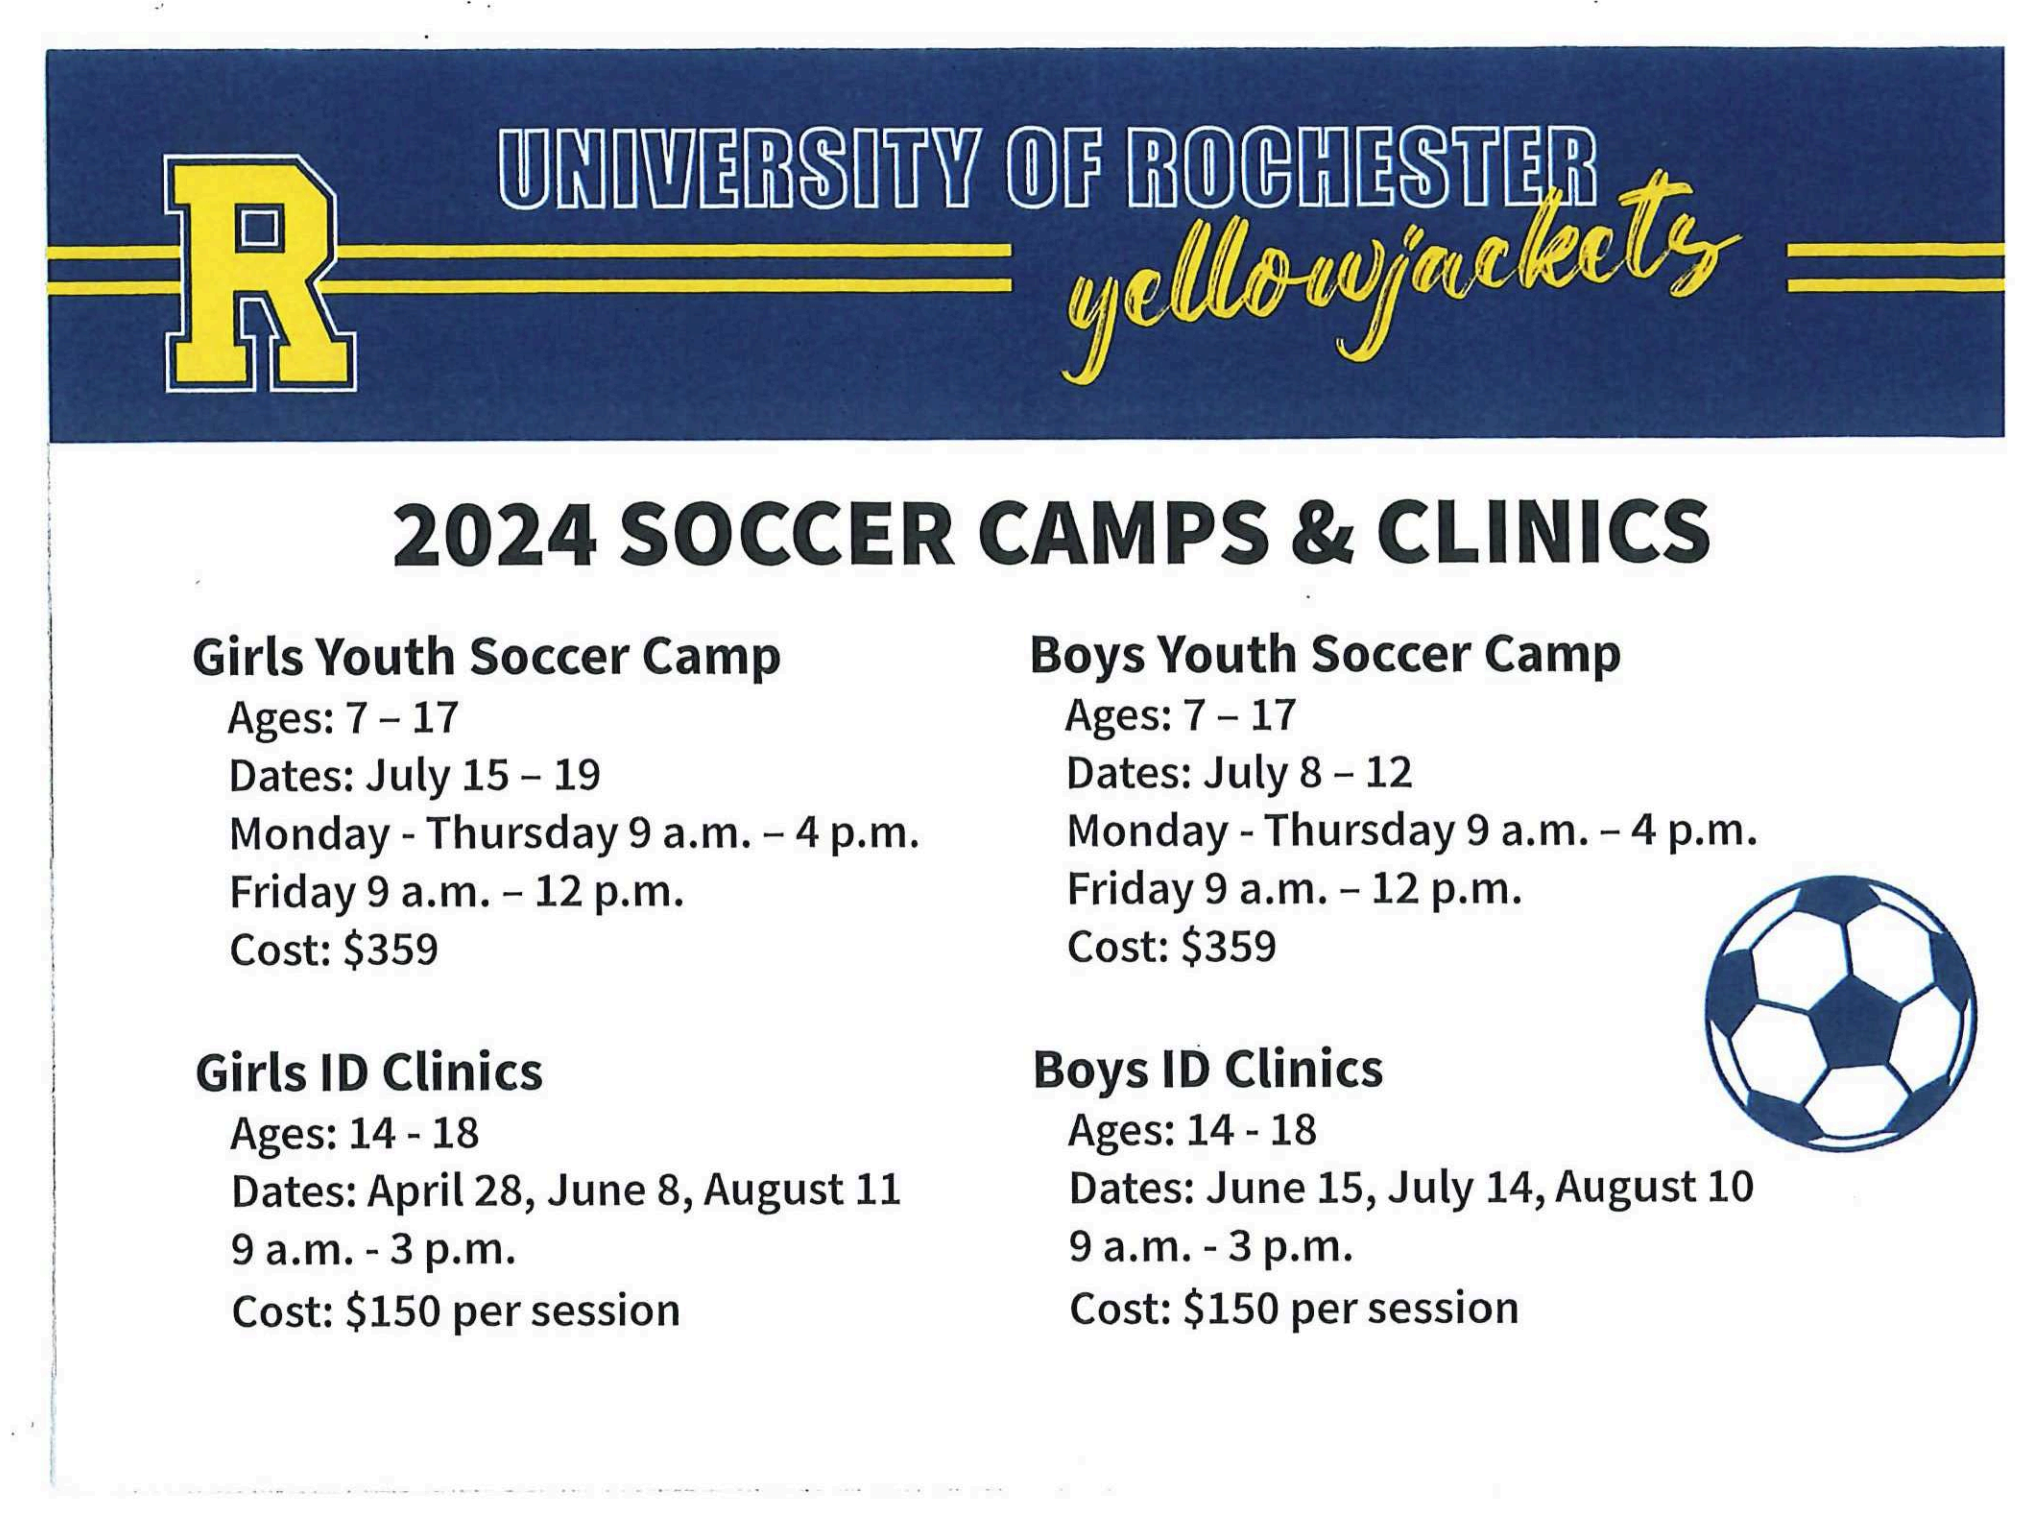 2024 soccer camps and clinics